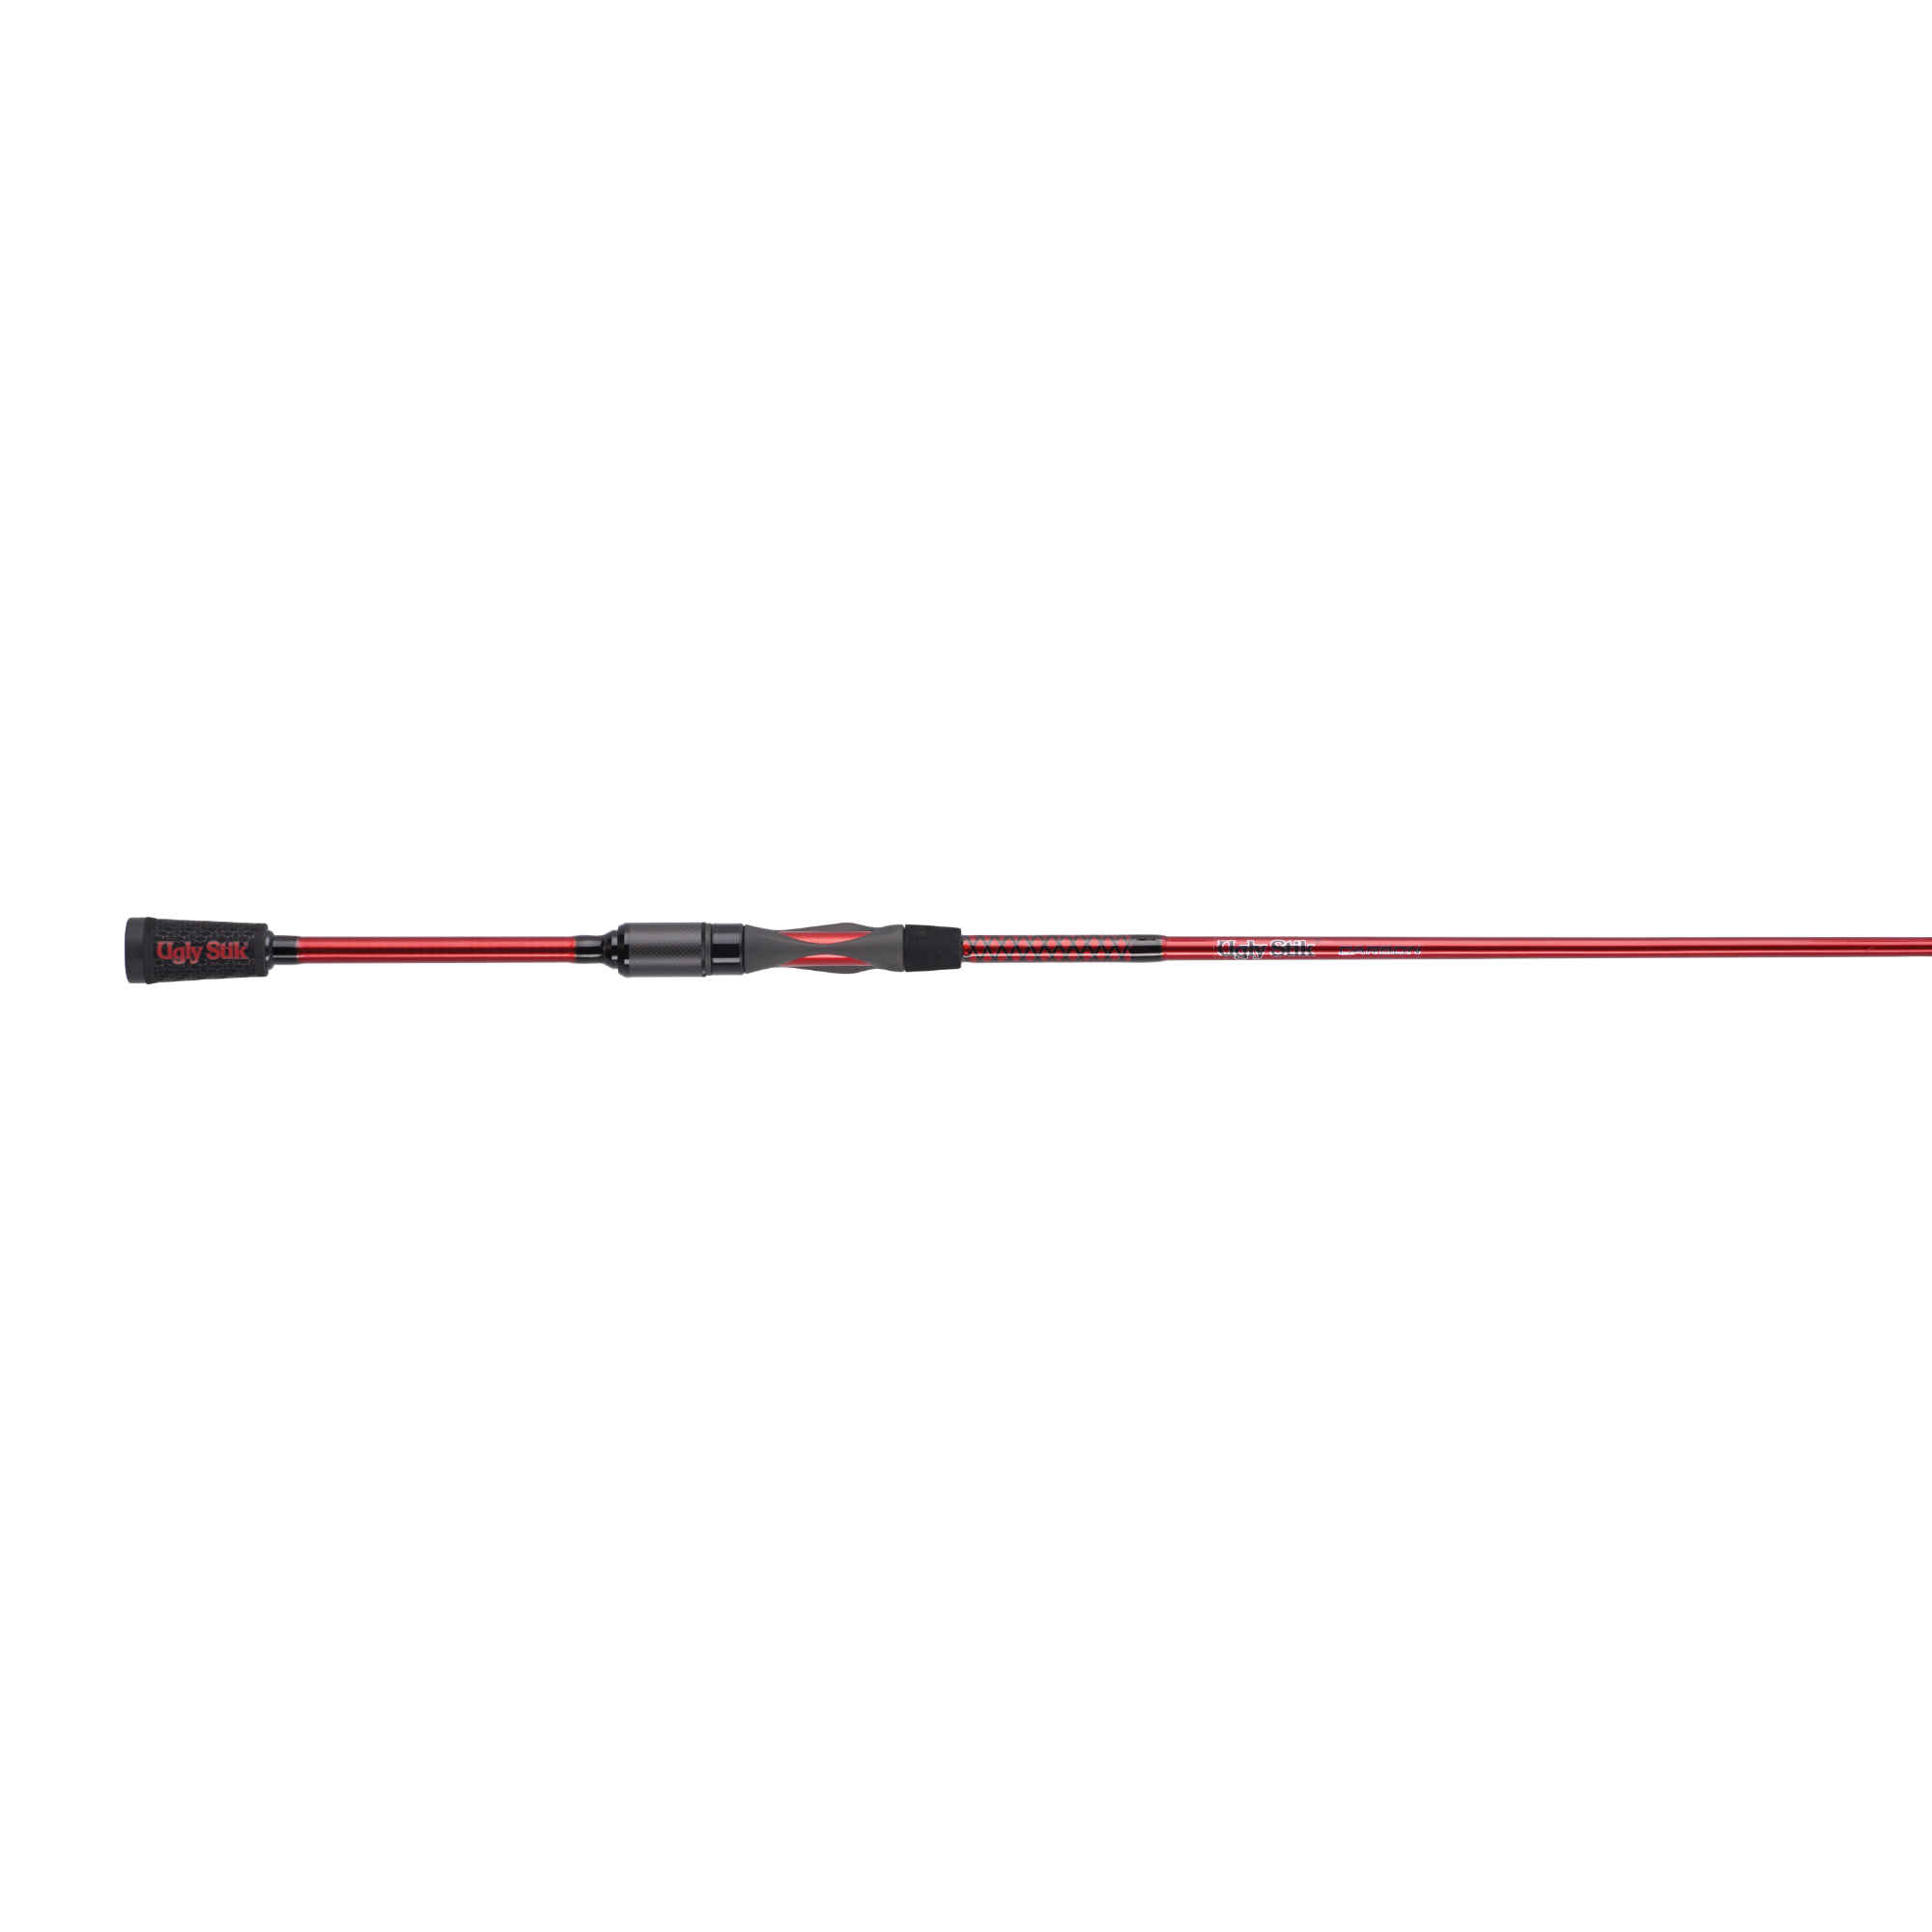 Ugly Stik Carbon Spinning Rod, 2 Piece, Medium, Fast, 8 Guides, 1